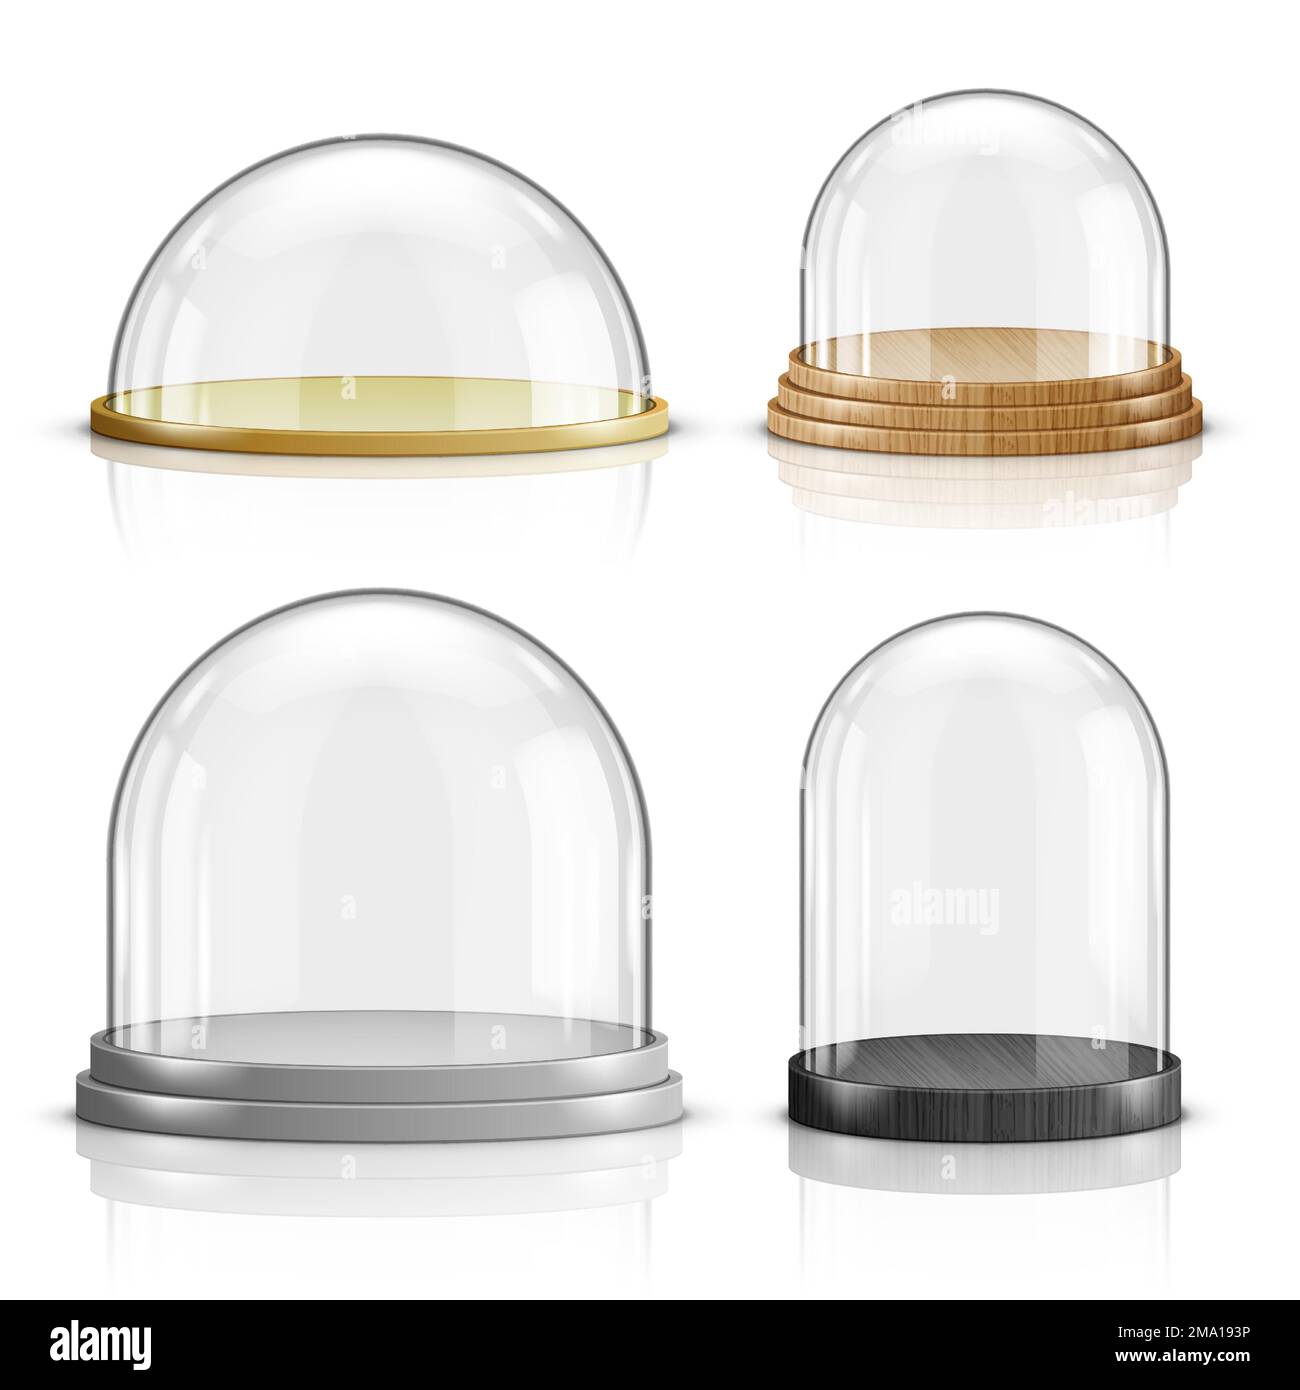 https://c8.alamy.com/comp/2MA193P/glass-dome-and-wooden-and-plastic-tray-realistic-vector-glass-round-dome-of-various-shapes-with-plate-food-storage-container-or-product-presentation-case-with-reflection-isolated-on-white-background-2MA193P.jpg